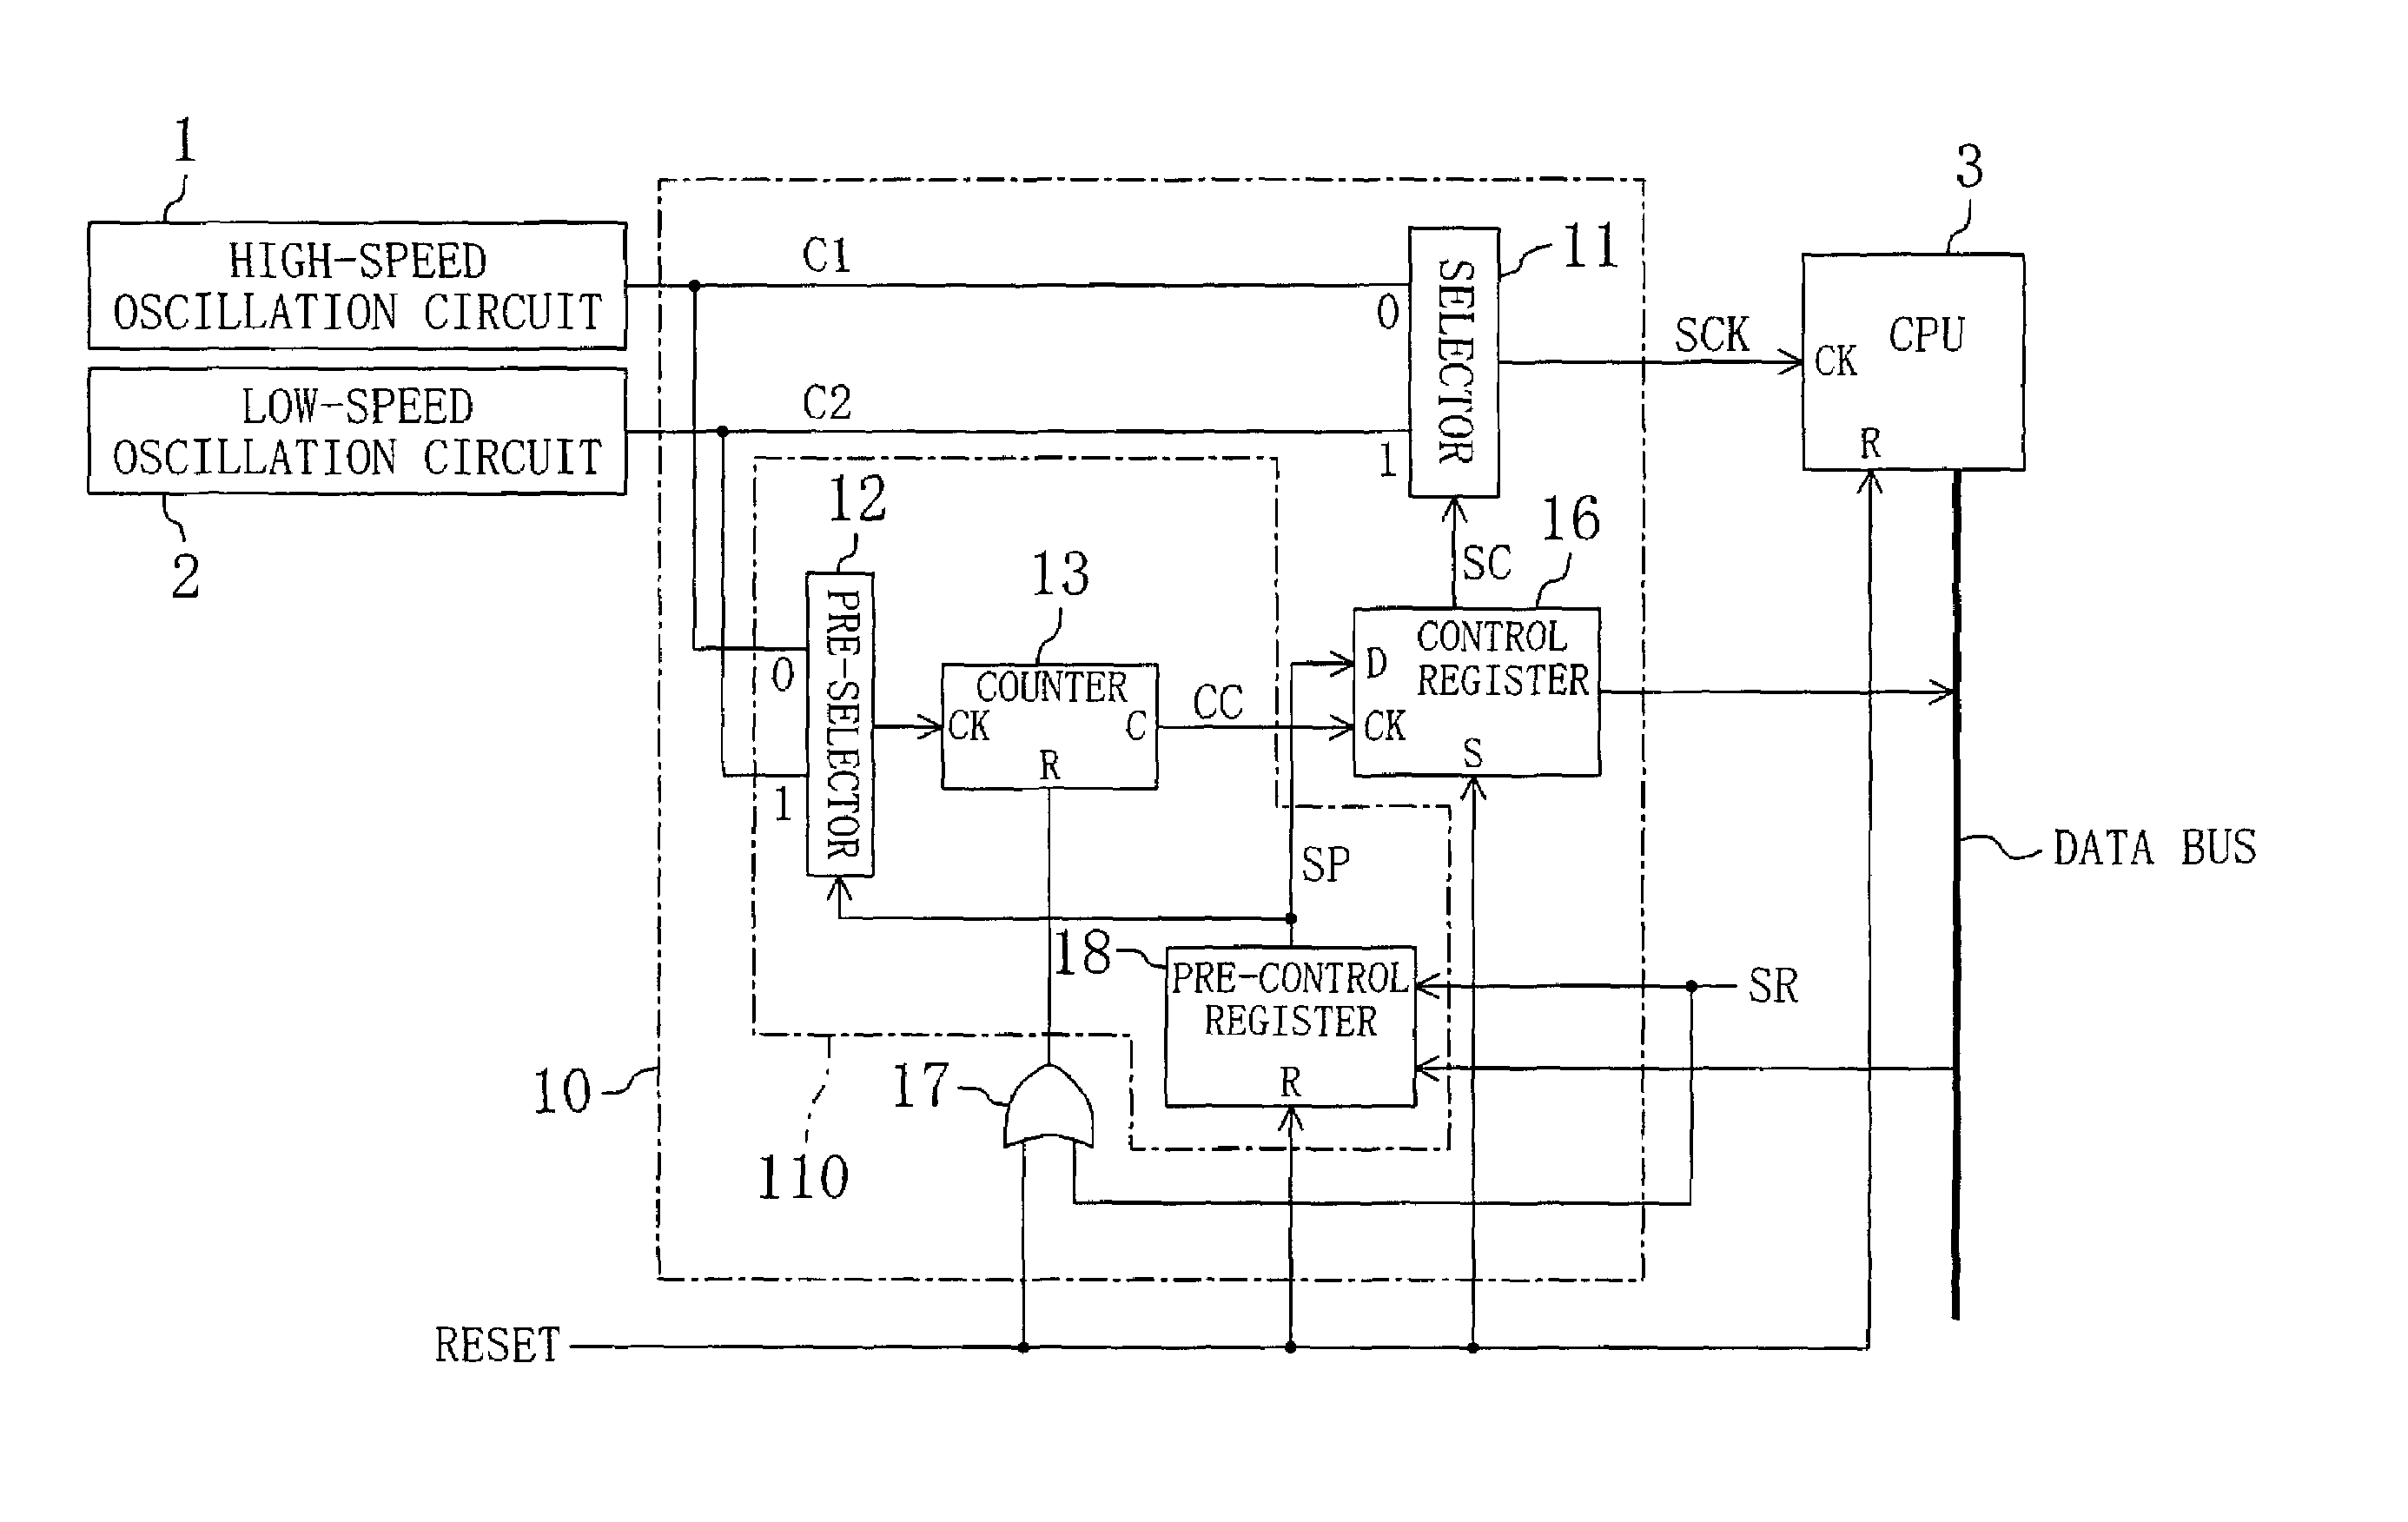 Clock switch device and microcontroller for selecting one of a plurality of clocks based on signal levels